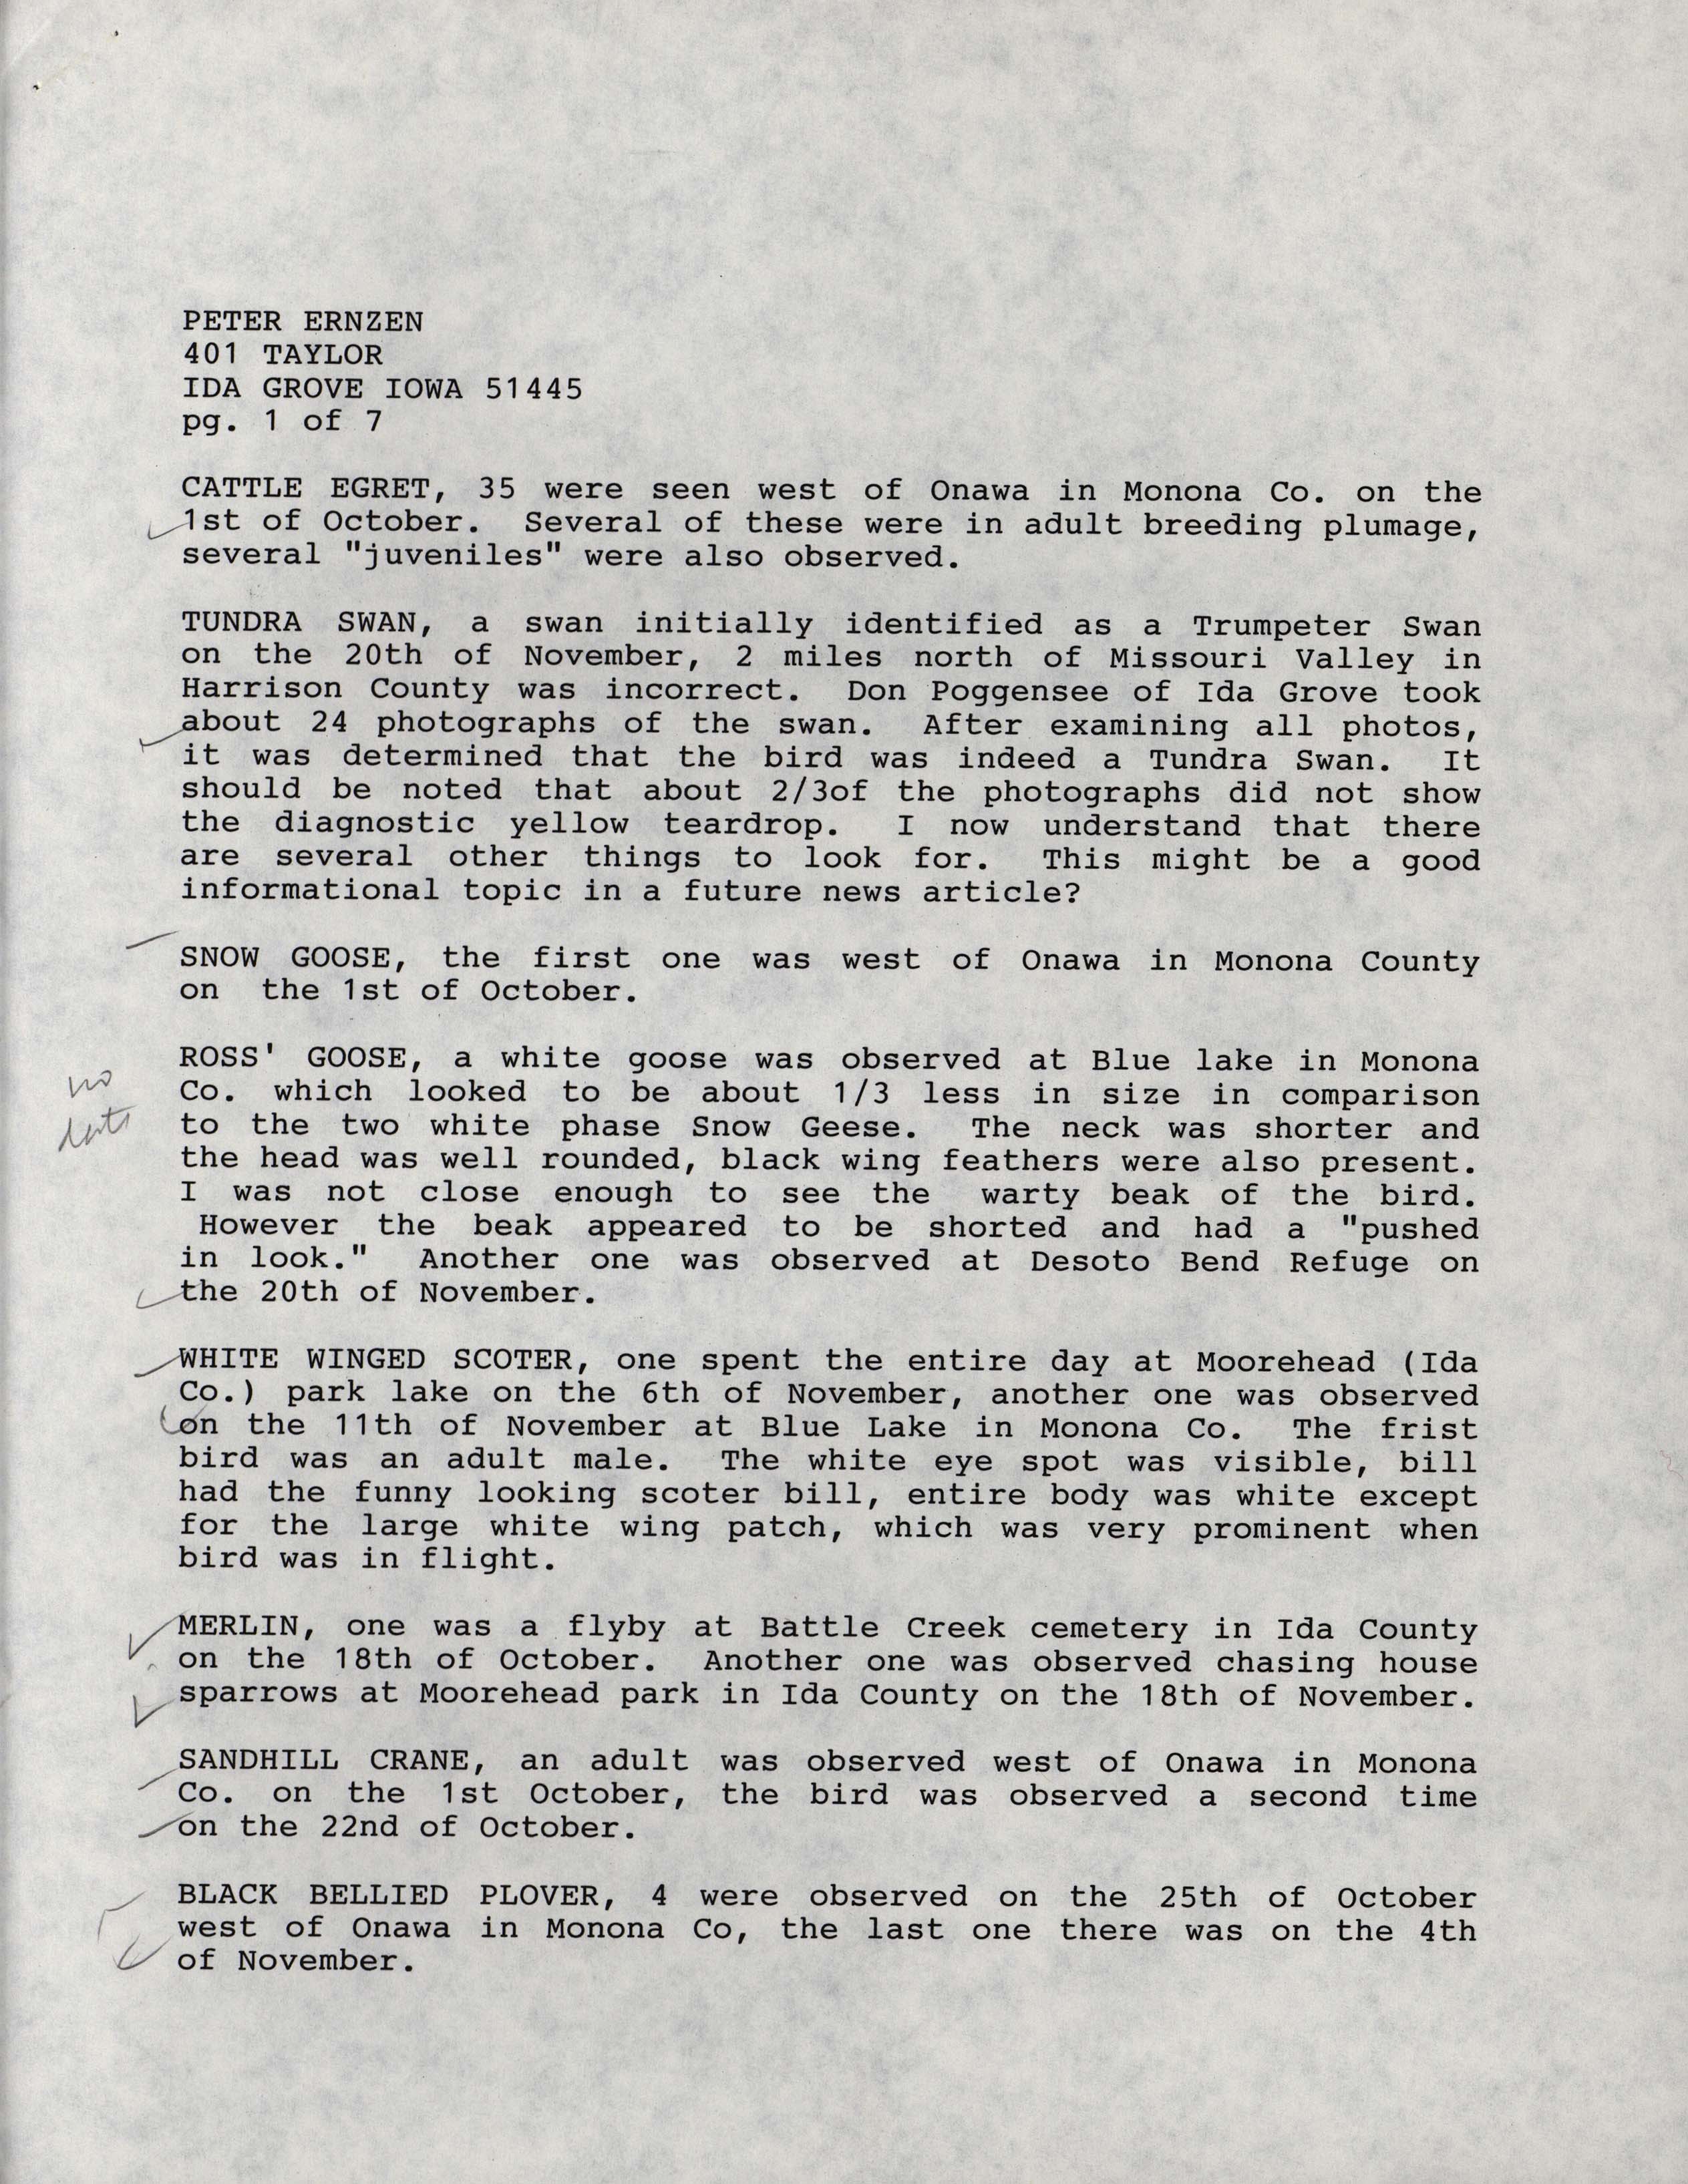 Field notes contributed by Peter Ernzen, fall 1993